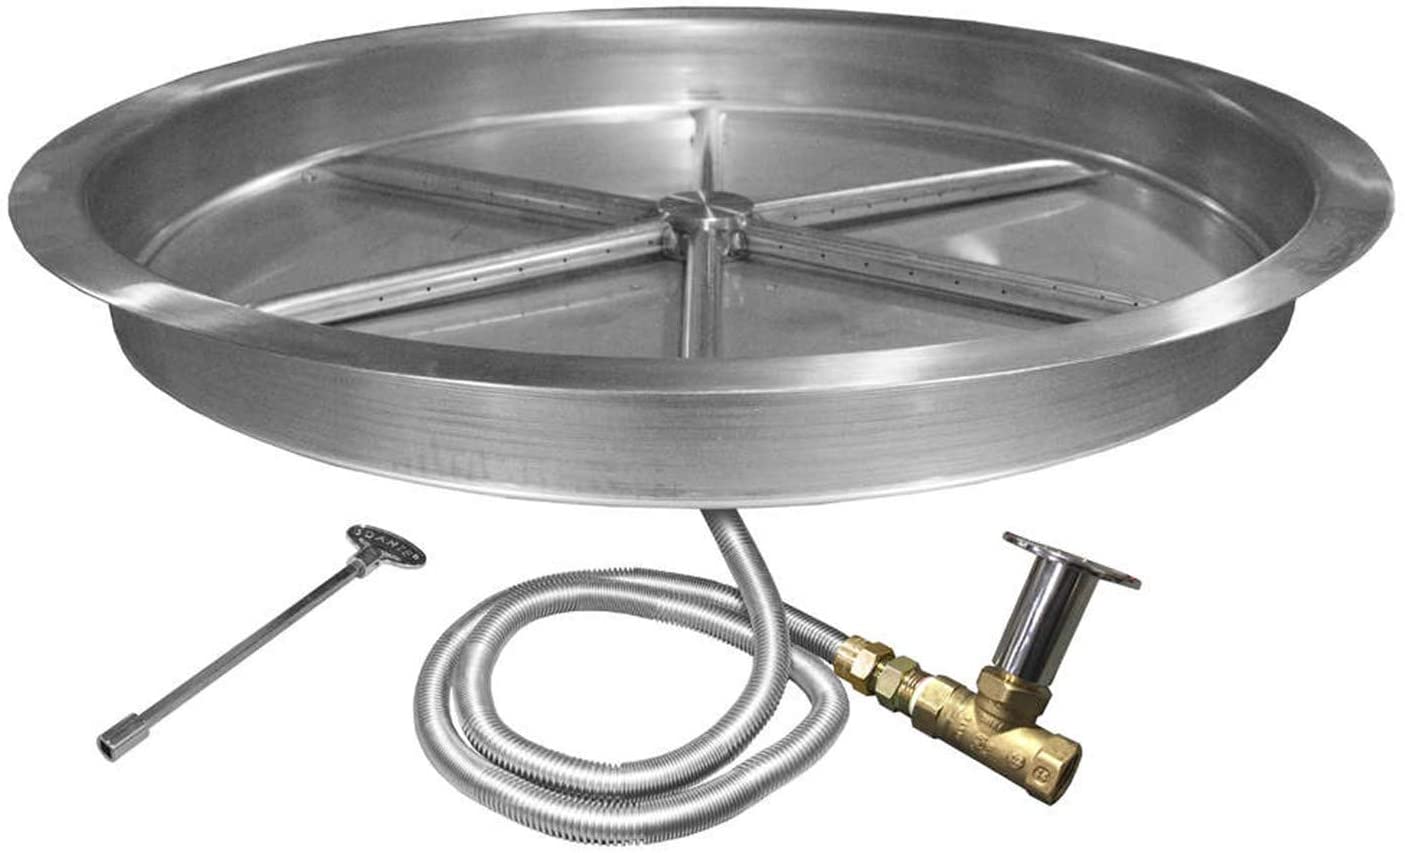 Firegear Stainless Steel Round Pan and Spur Burner Firegear - 29" Pan with 22" SS Burning Spur, MT Ignition, for NG (LP Kit Purchase FGLPK41)